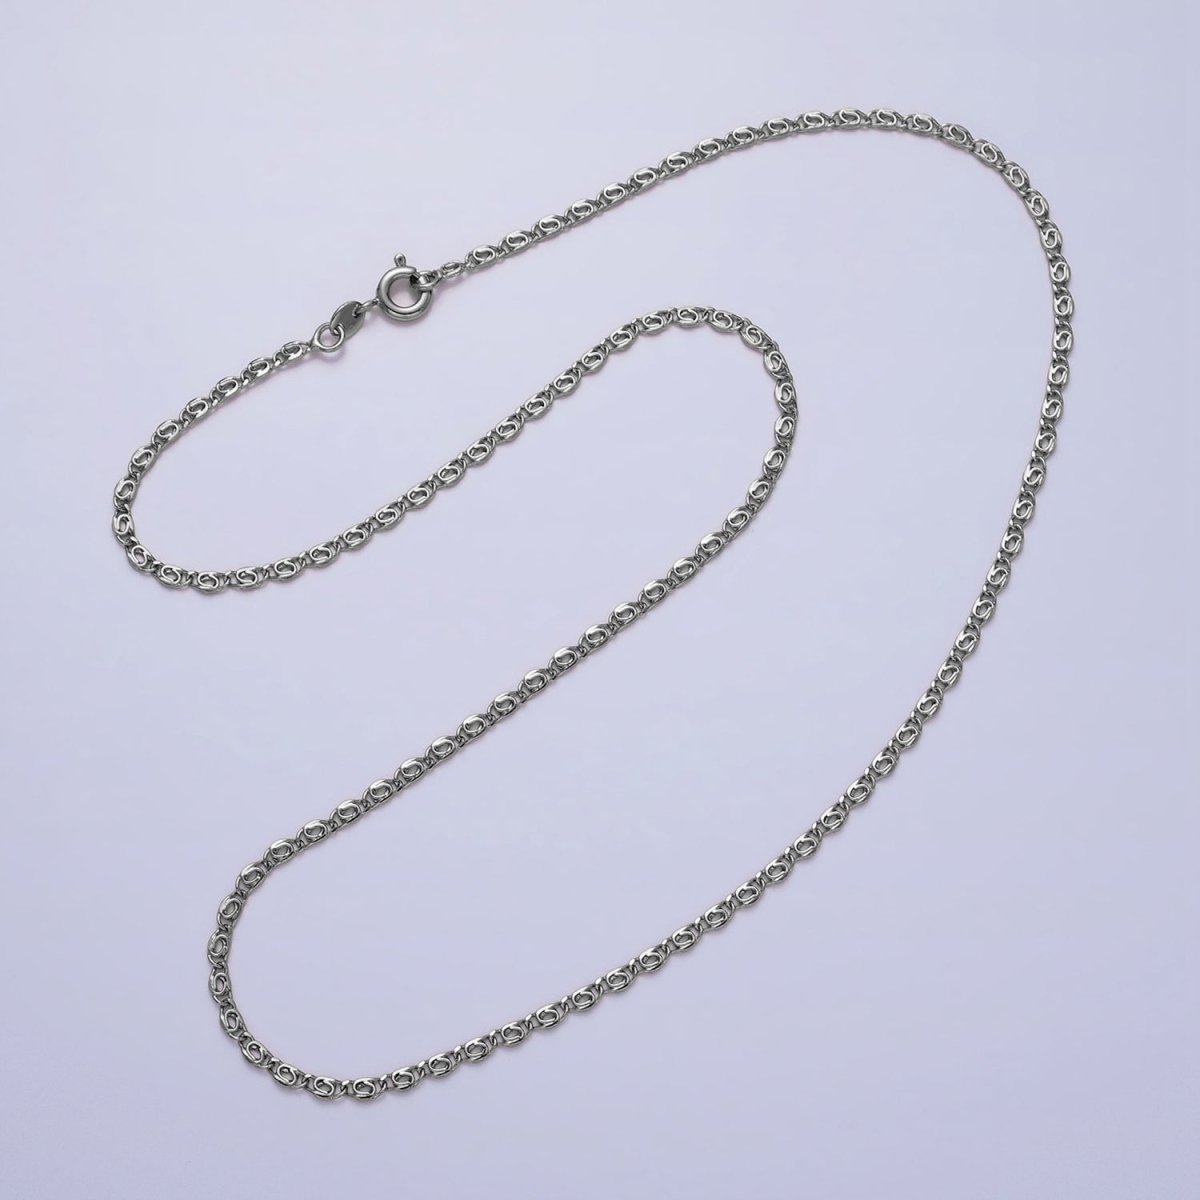 Dainty Scroll Chain Necklace 17.75 inch, 19.6 inch Long Ready to Wear Necklace in 18k Gold Filled | WA-1680 WA-1681 WA-1682 WA-1683 Clearance Pricing - DLUXCA